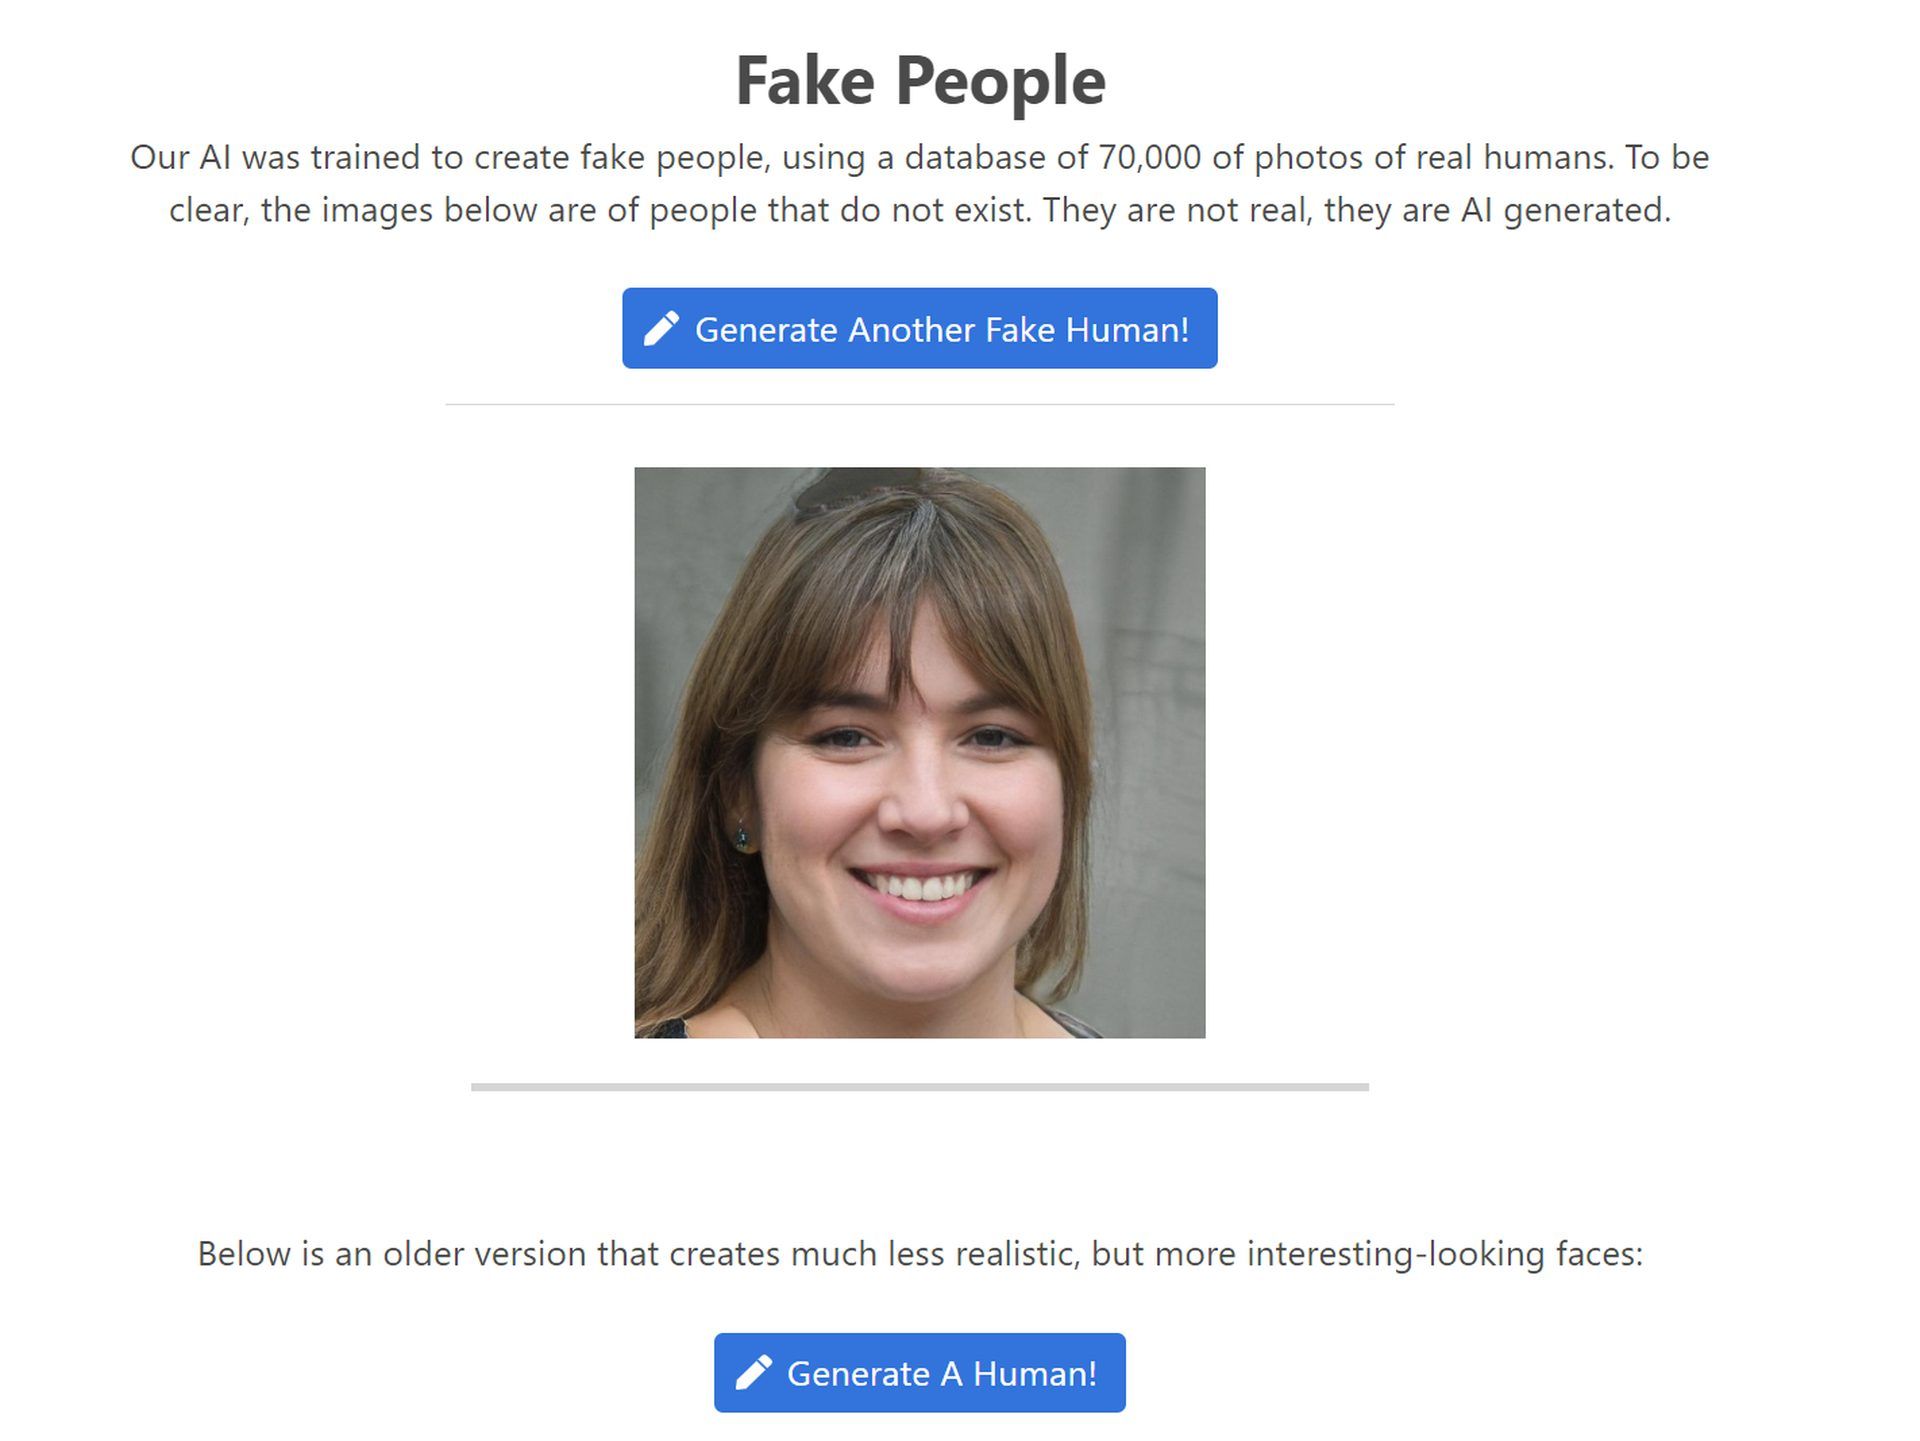 Check out the best fake name generators and This Person Does Not Exist like random face generators. AI impersonation is popular nowadays.